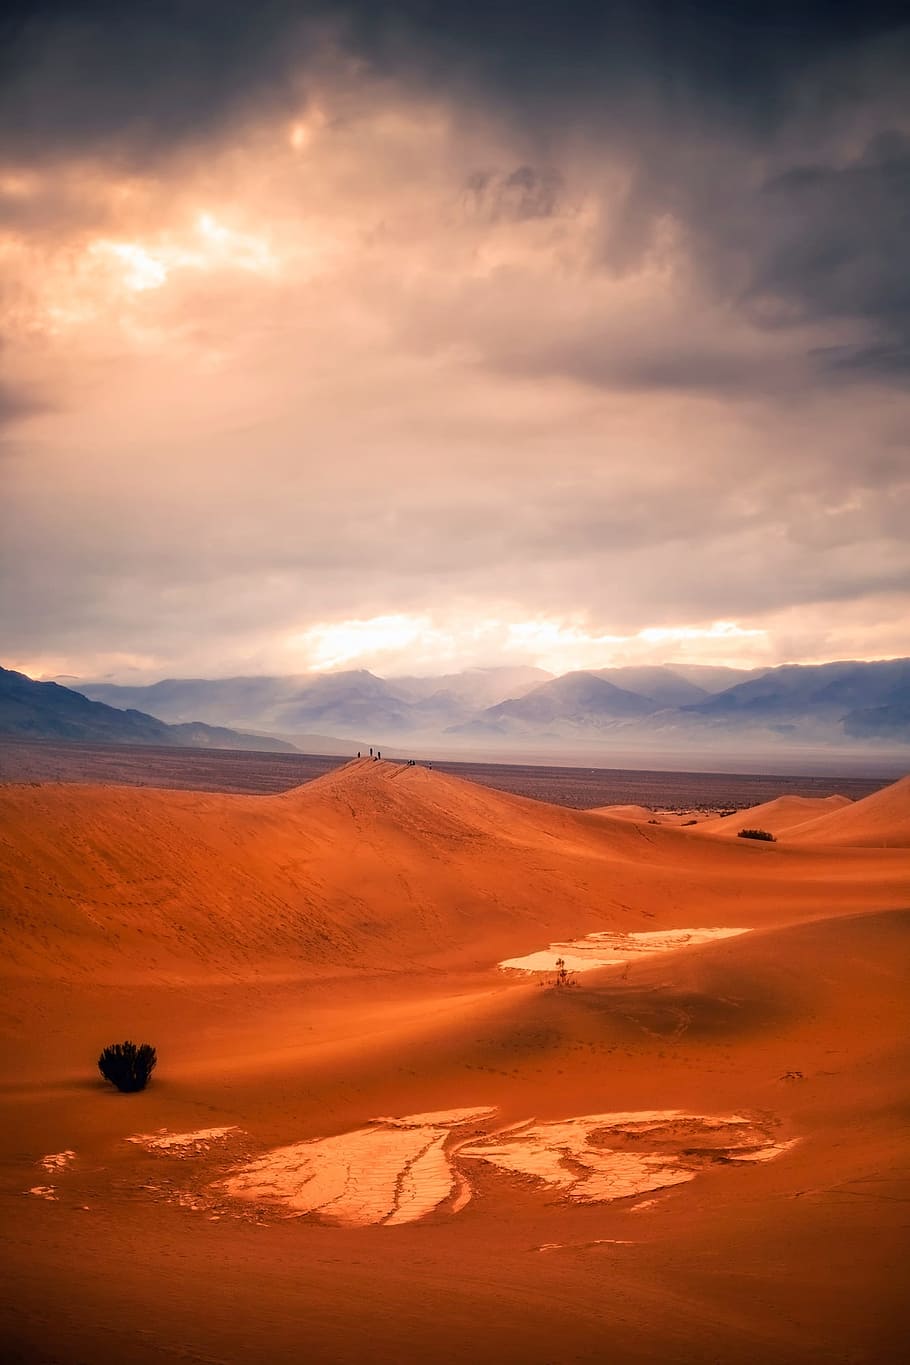 sand dunes, cloudy, skies, death valley, california, desert, sky, clouds, scenic, mountains